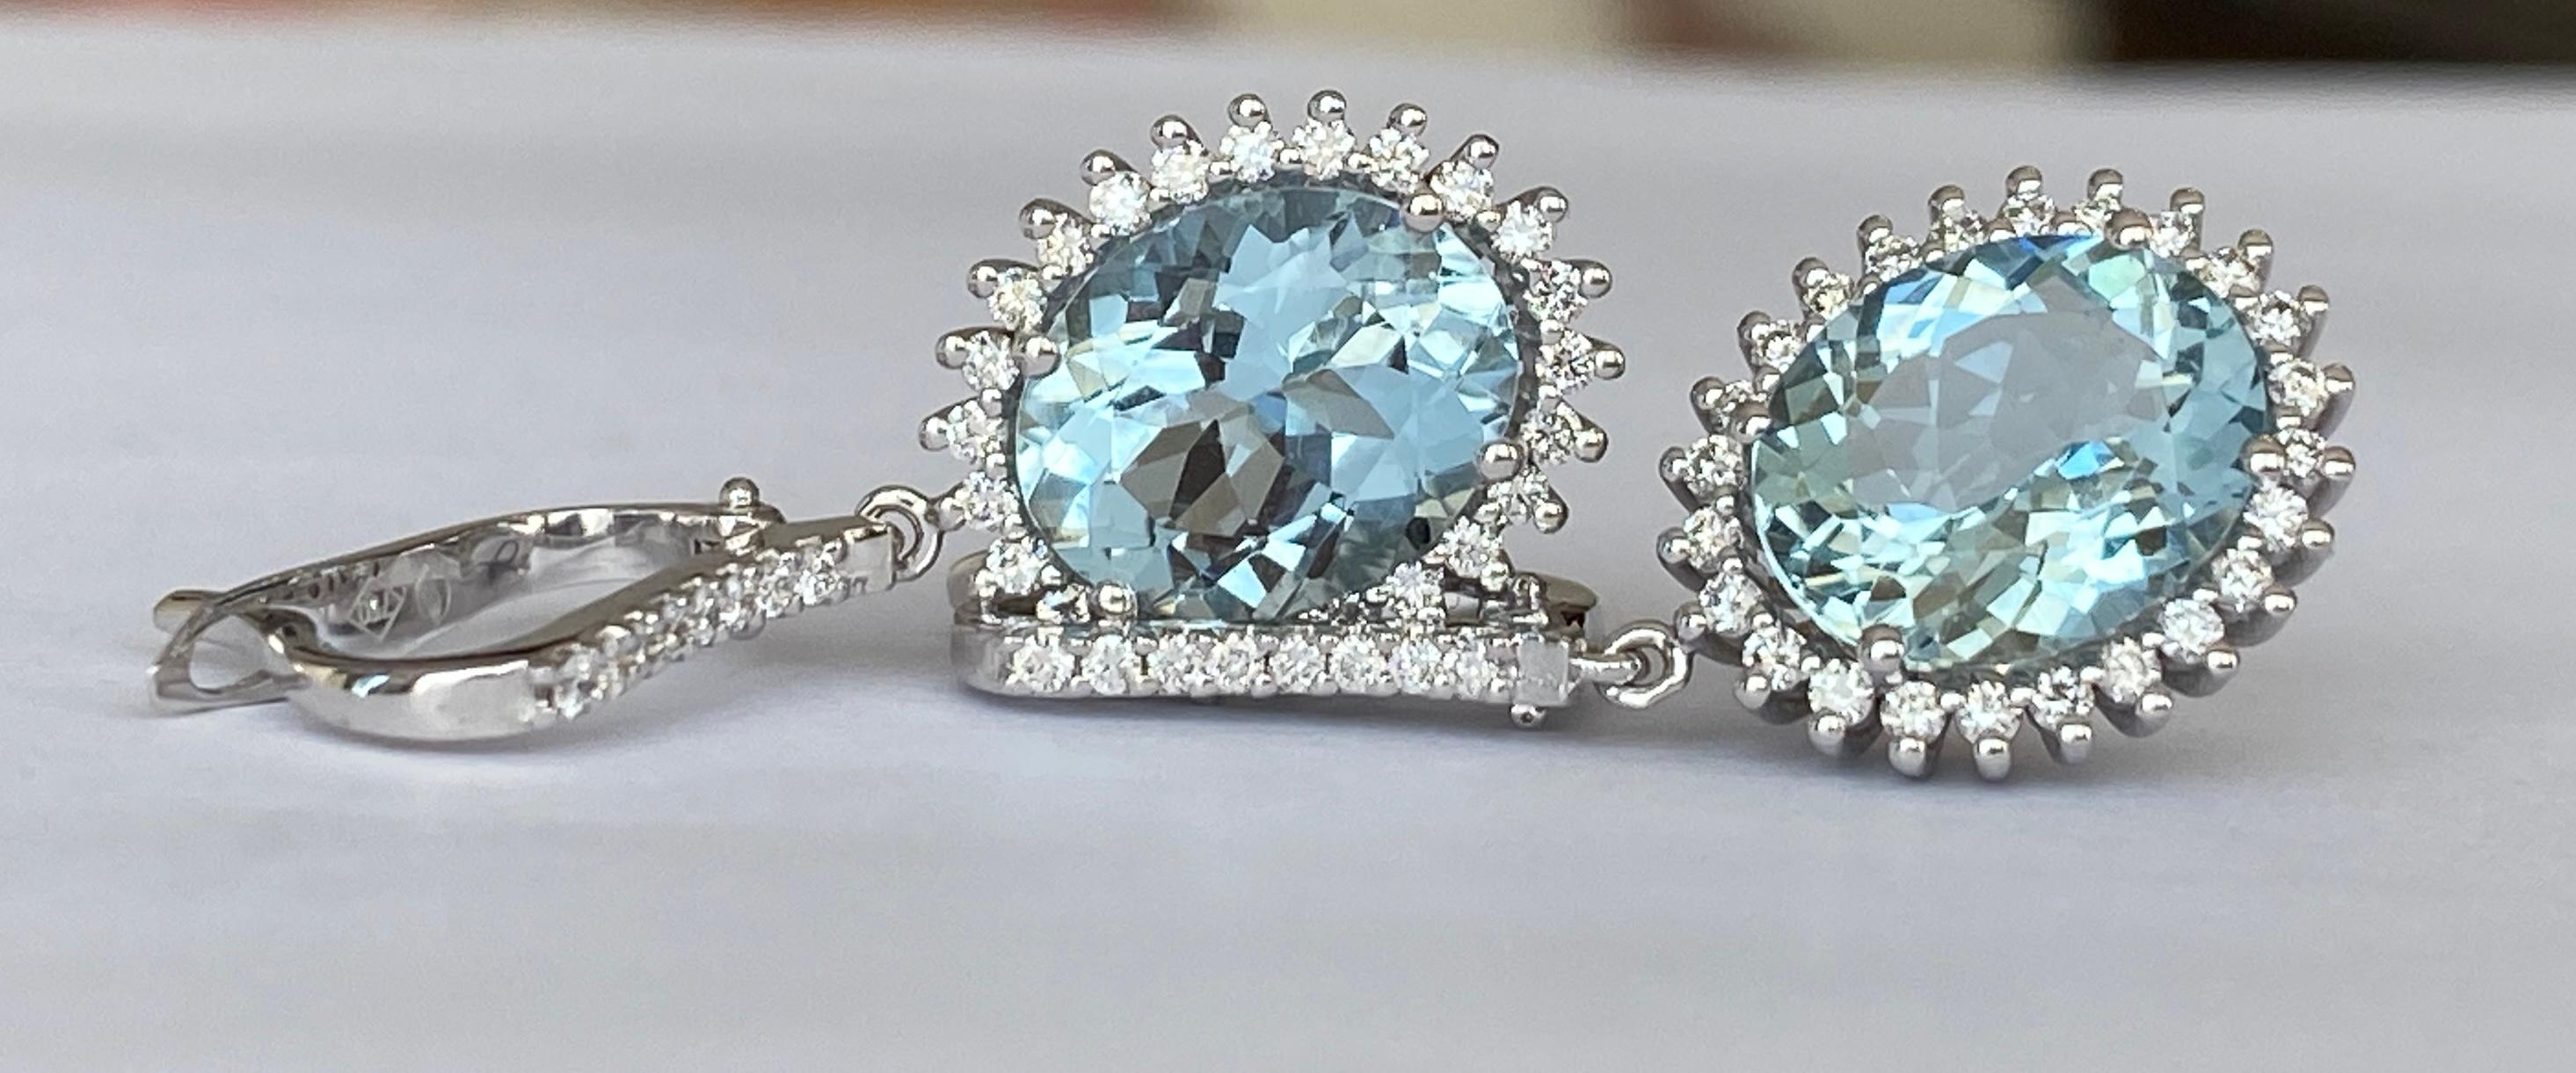 Offered are beautiful ear studs in white gold, with two oval faceted aquamarines of approx. 6.02 carats. The stones are surrounded by an entourage of 64 brilliant cut diamonds in total approx. 0.55 ct of quality F/G/VS/SI. ALGT certificate is